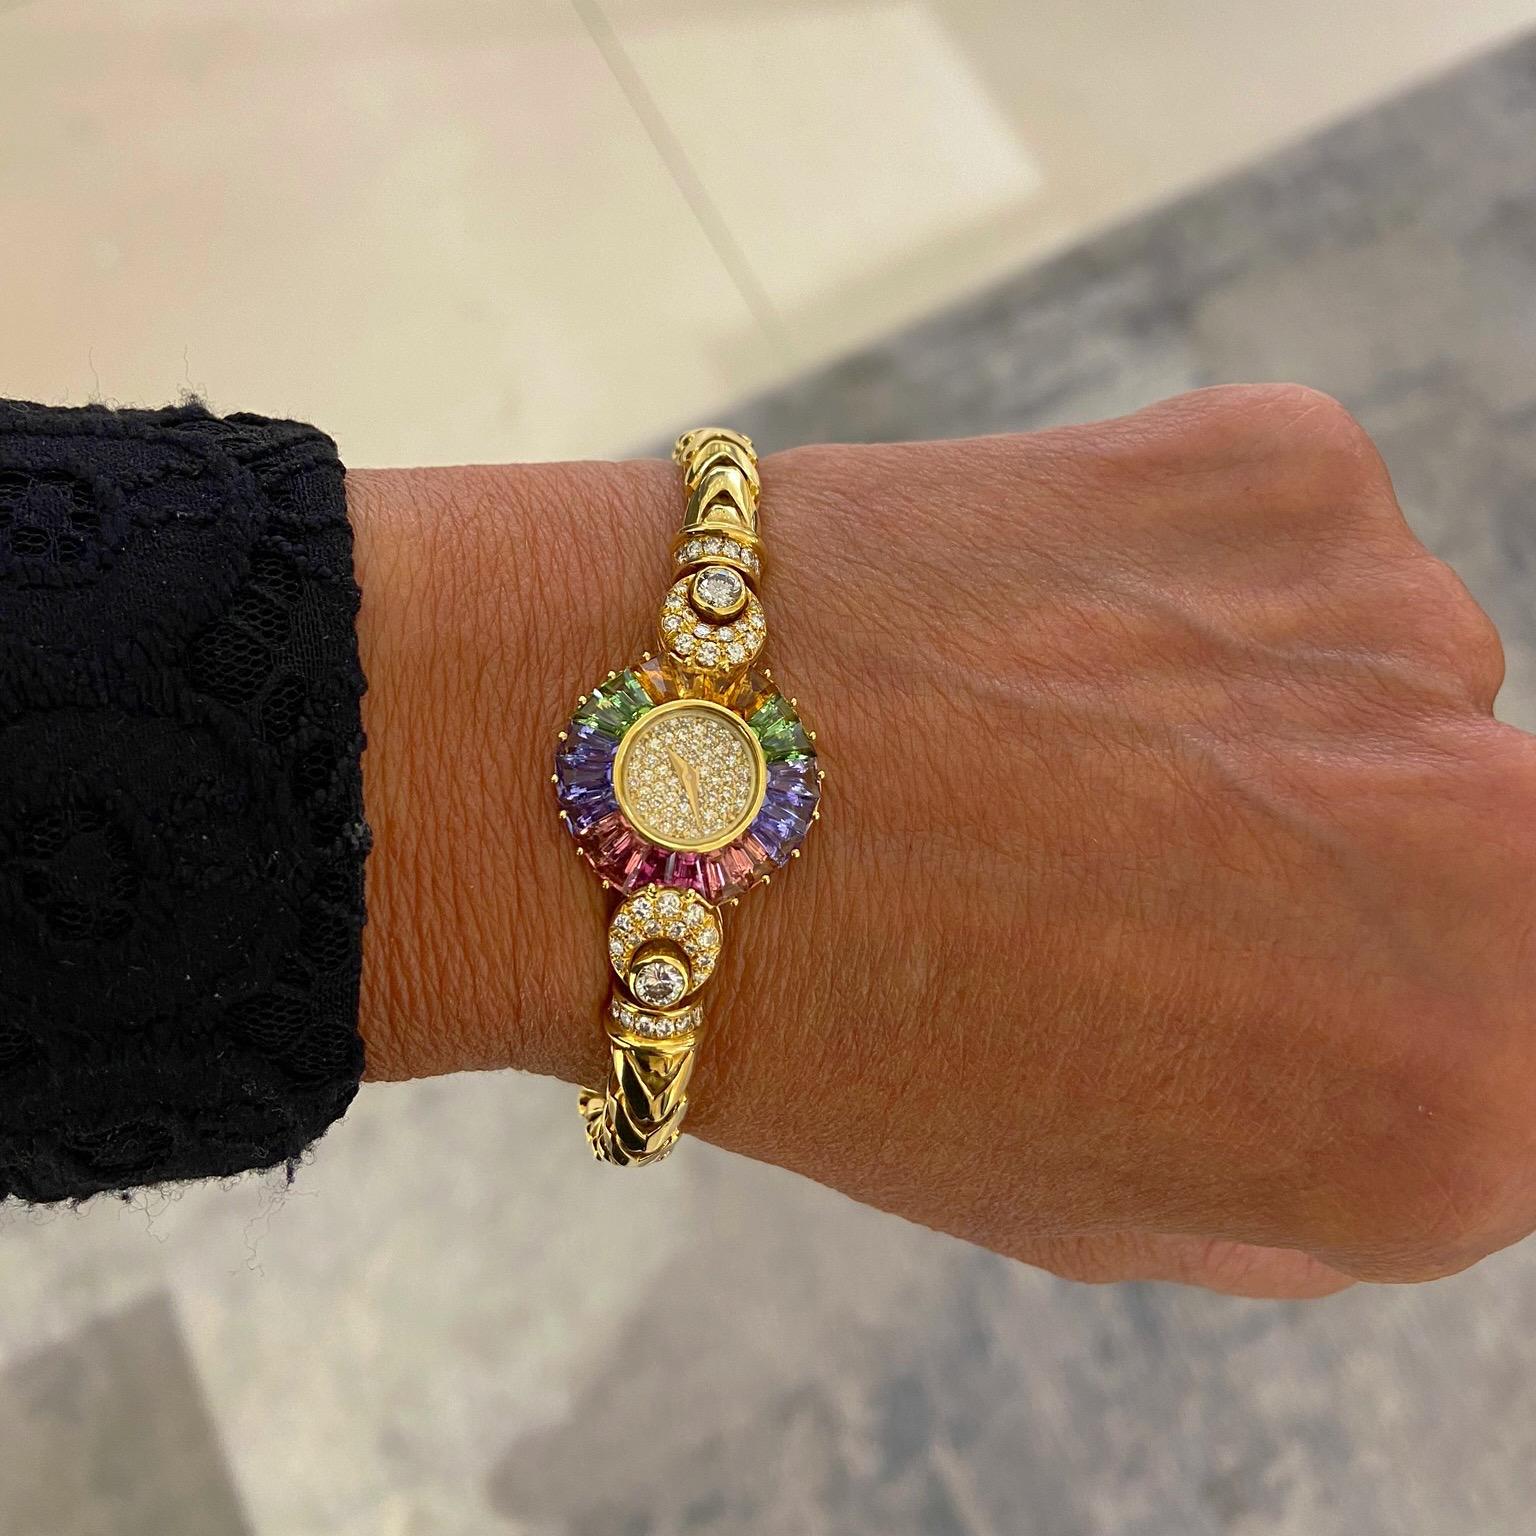 Contemporary DeLaneau 18 Karat Yellow Gold Diamond and Multicolored Sapphires Bracelet Watch For Sale